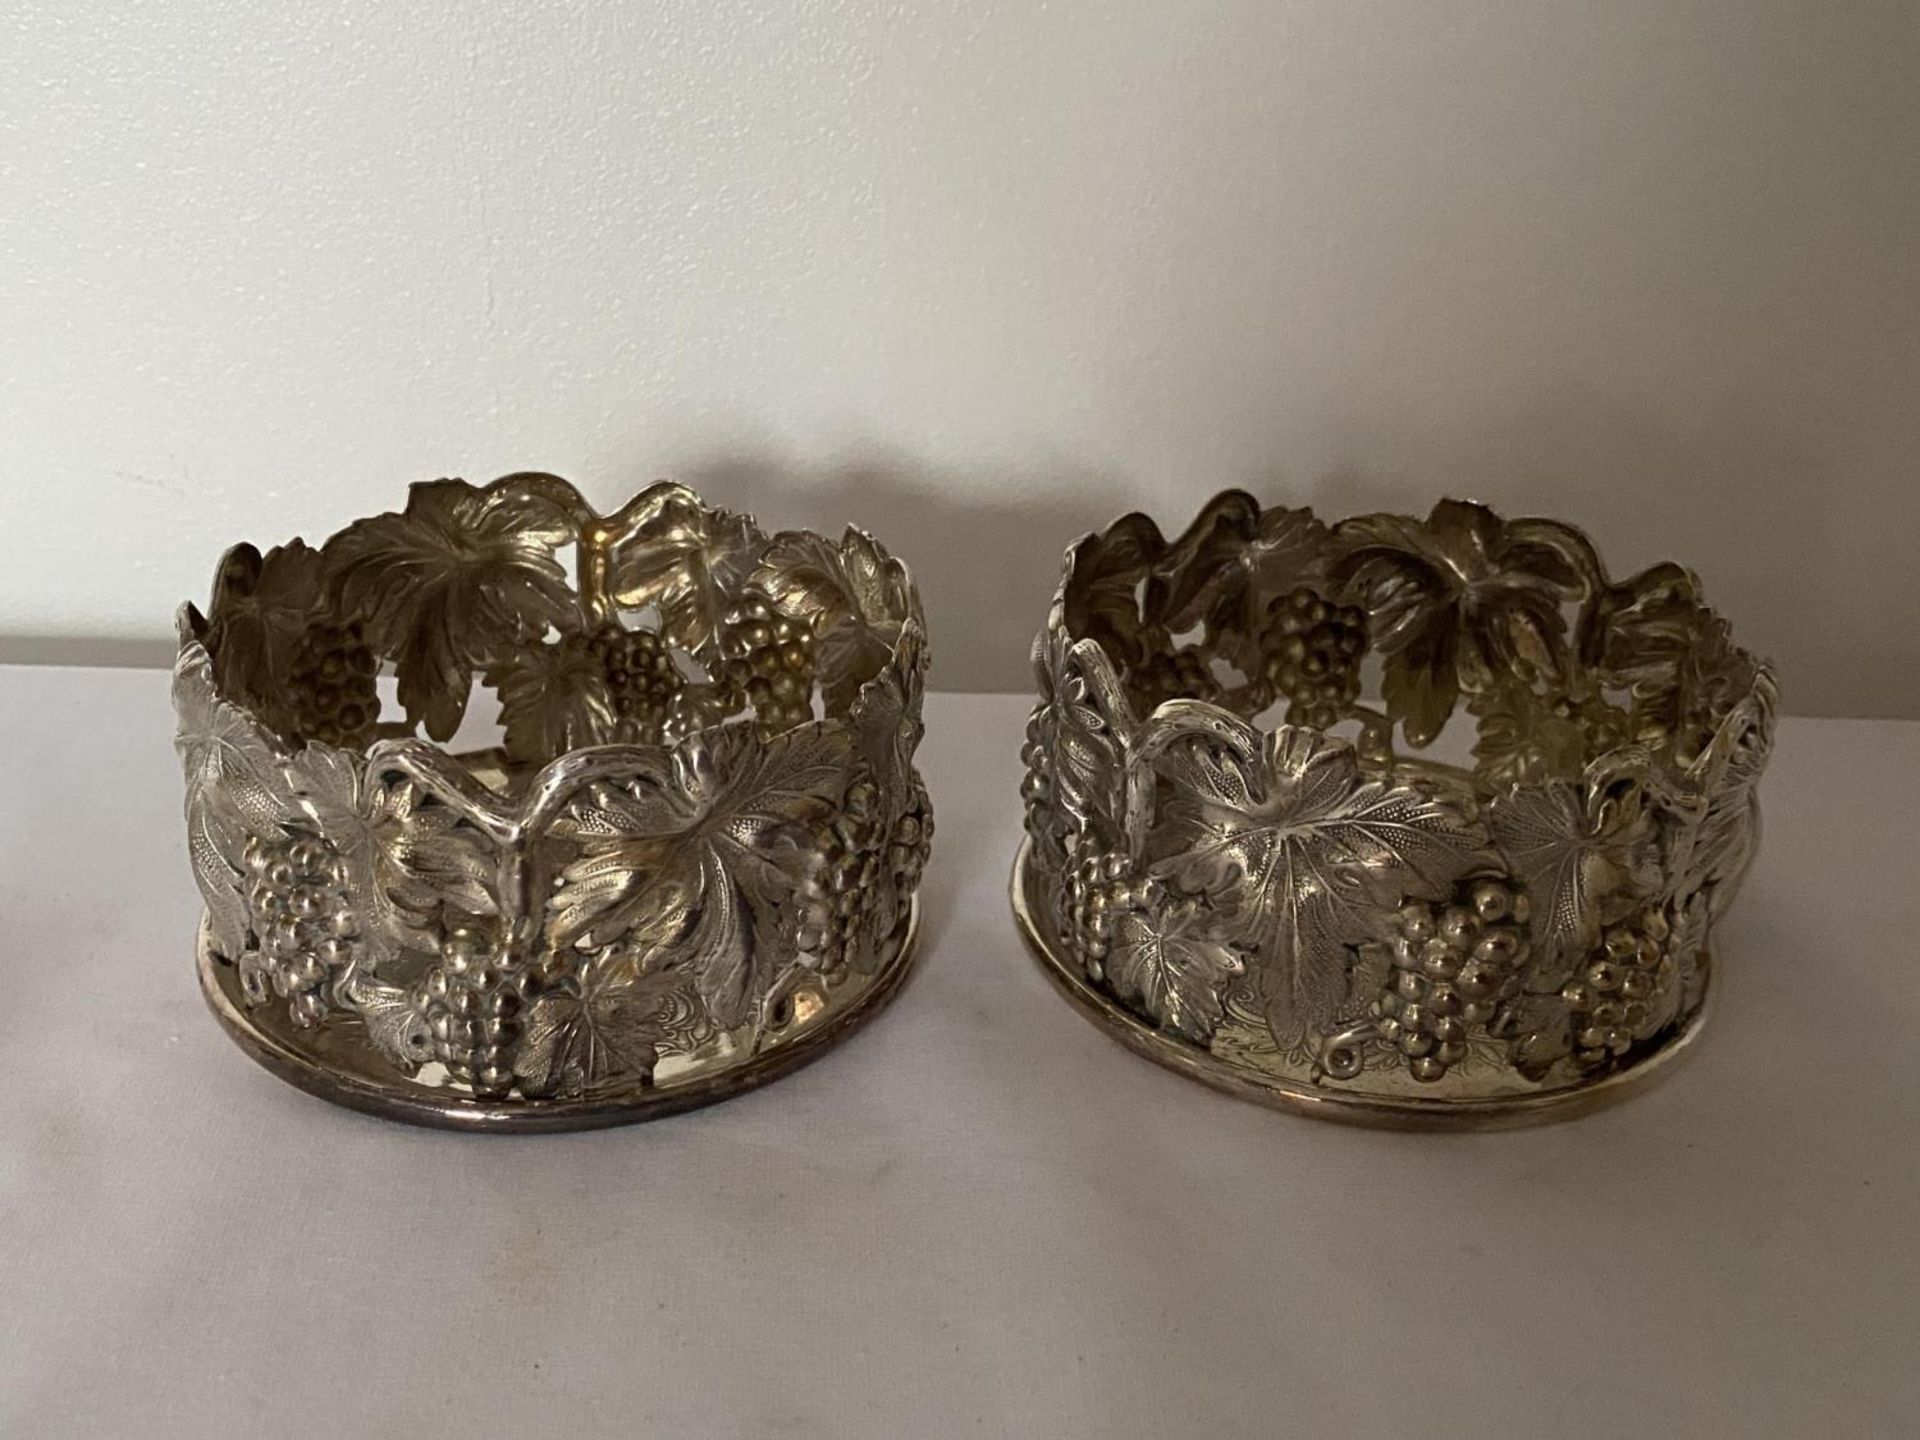 A PAIR OF PORTUGUESE TOPAZIO CASQUINHA ORNATE SILVER PLATED WINE COASTERS, T CROWN MARK AND DATE